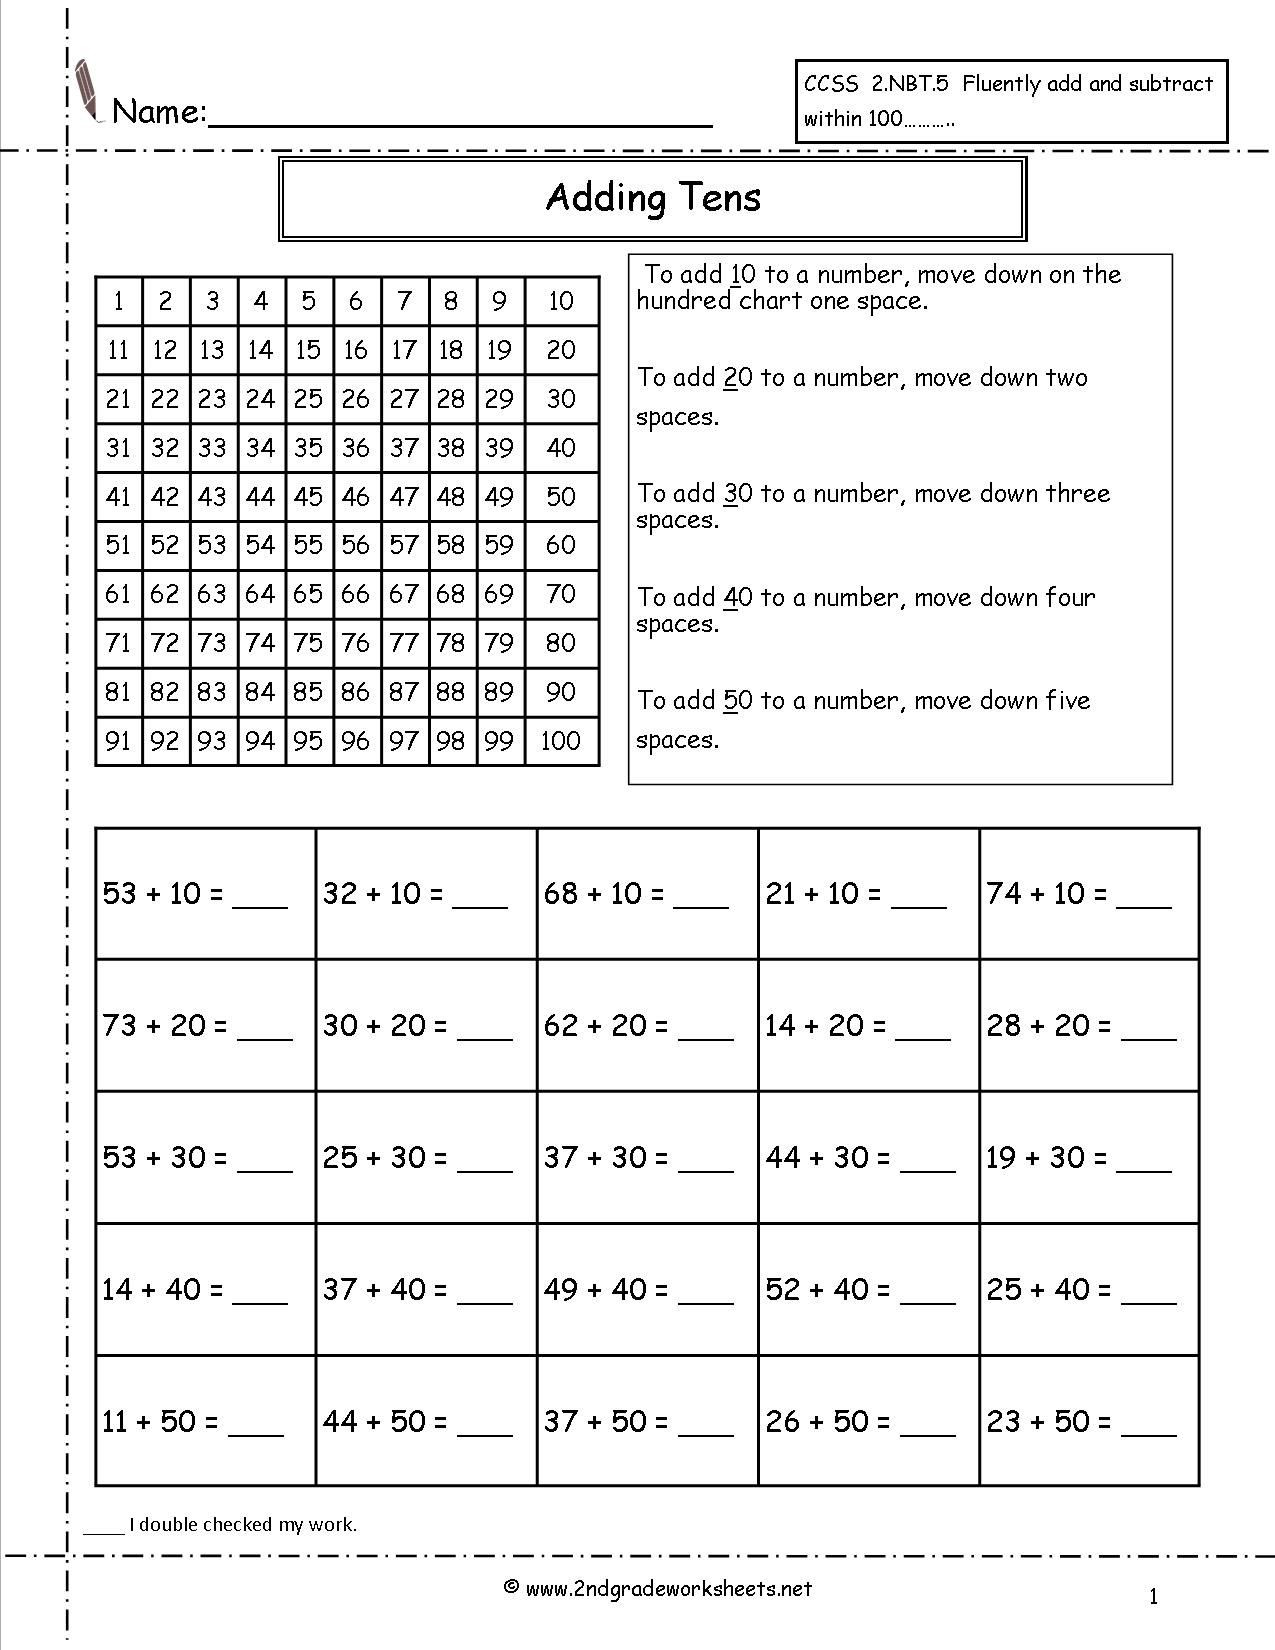 7th Grade Math Enrichment Worksheets Adding Tens to A Number Worksheet